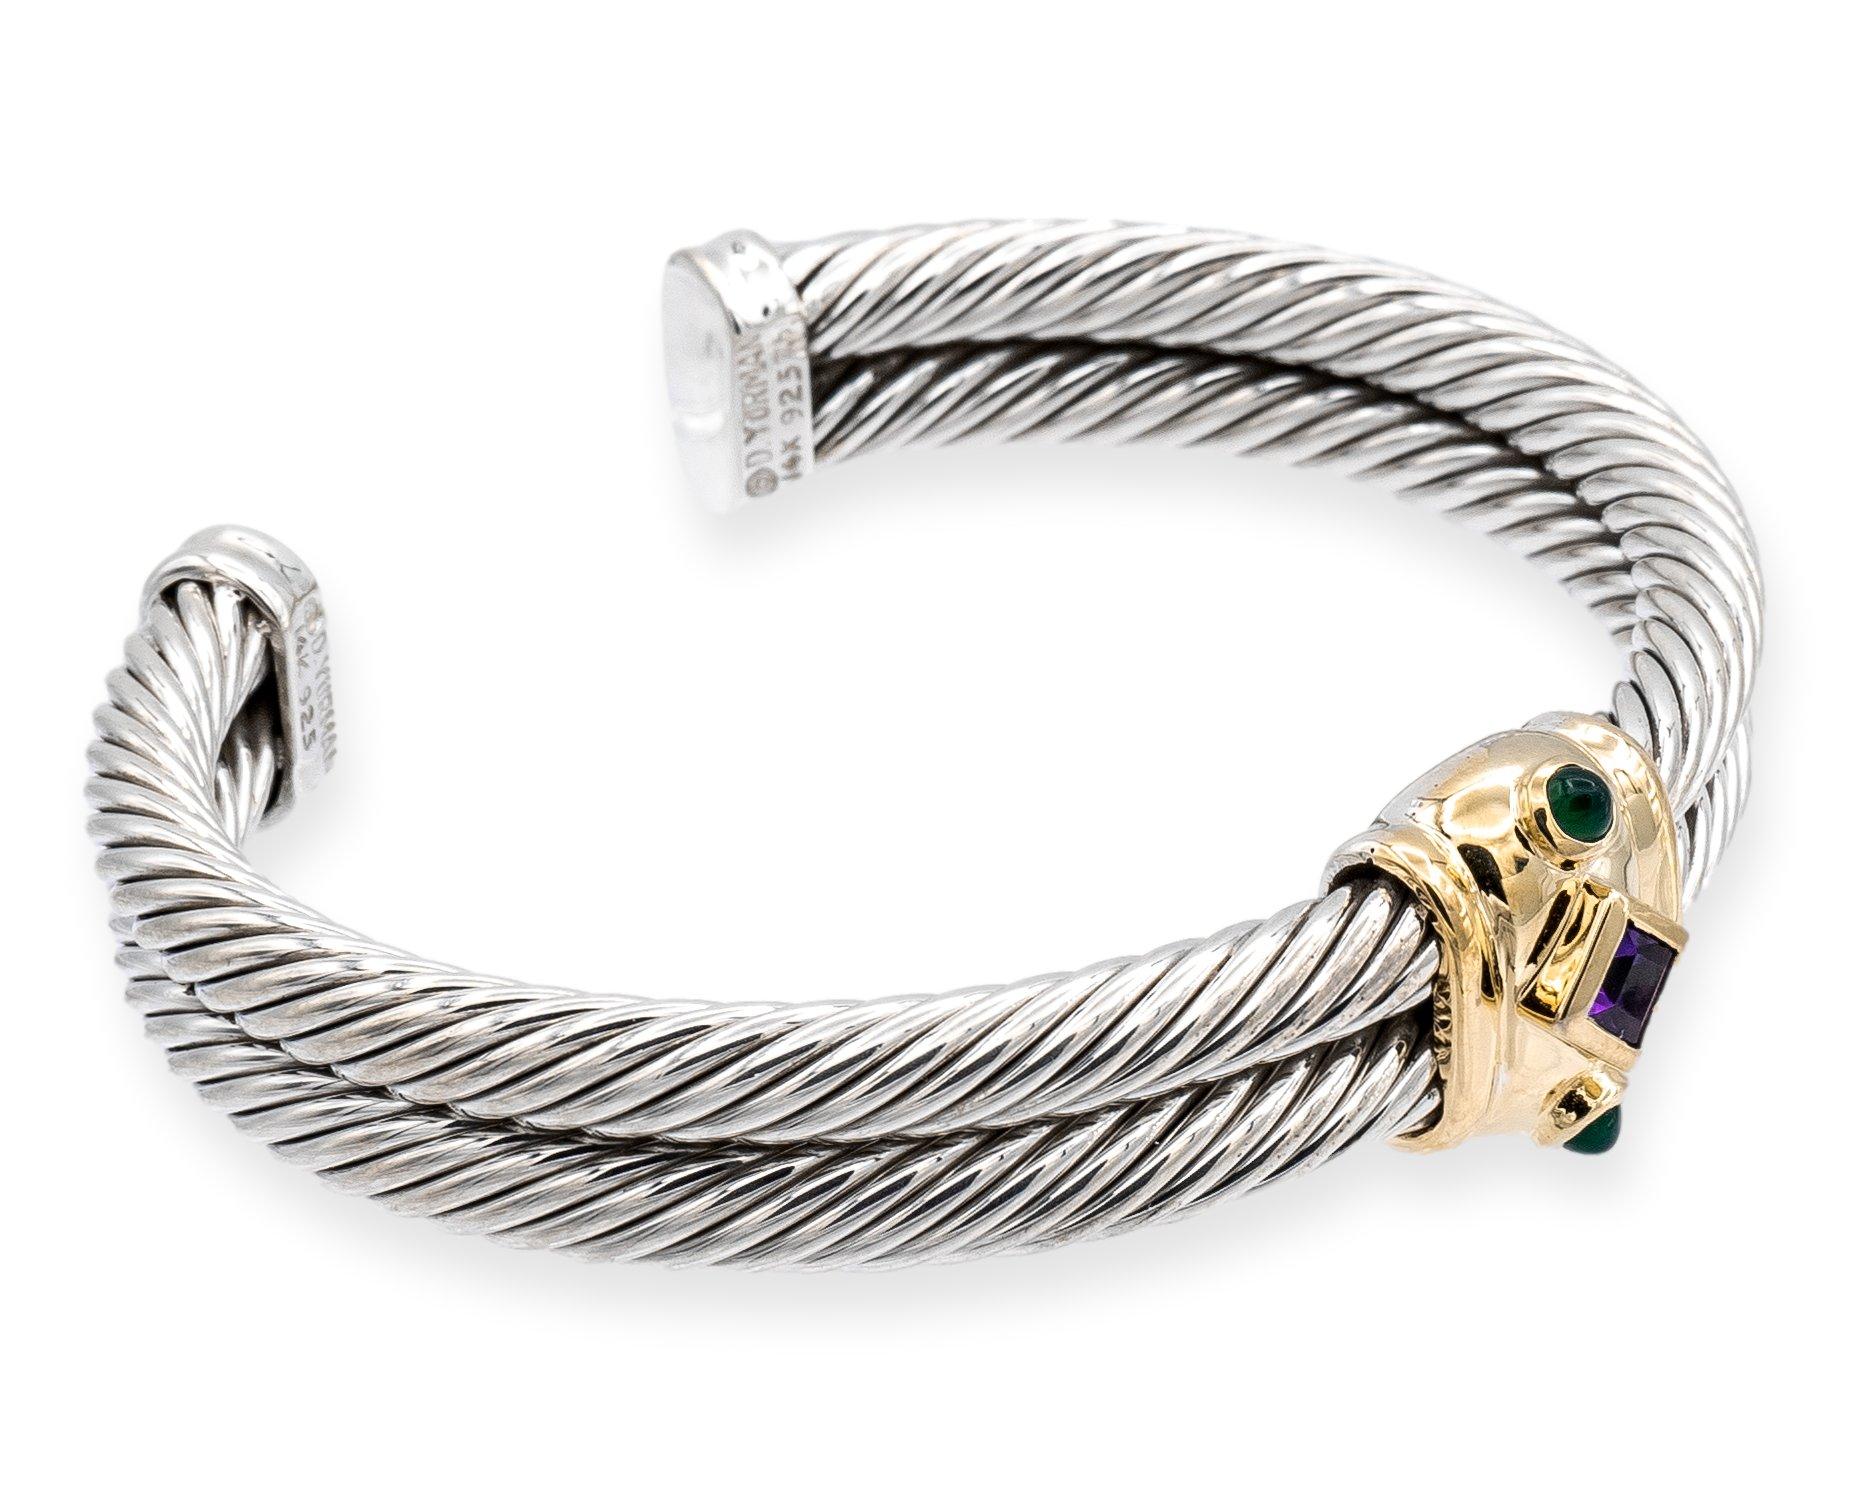 David Yurman is a well-known luxury jewelry brand known for its artistic designs and high-quality materials. This Renaissance style bracelet is made from a combination of sterling silver and 14K yellow gold, and features a double row cable design